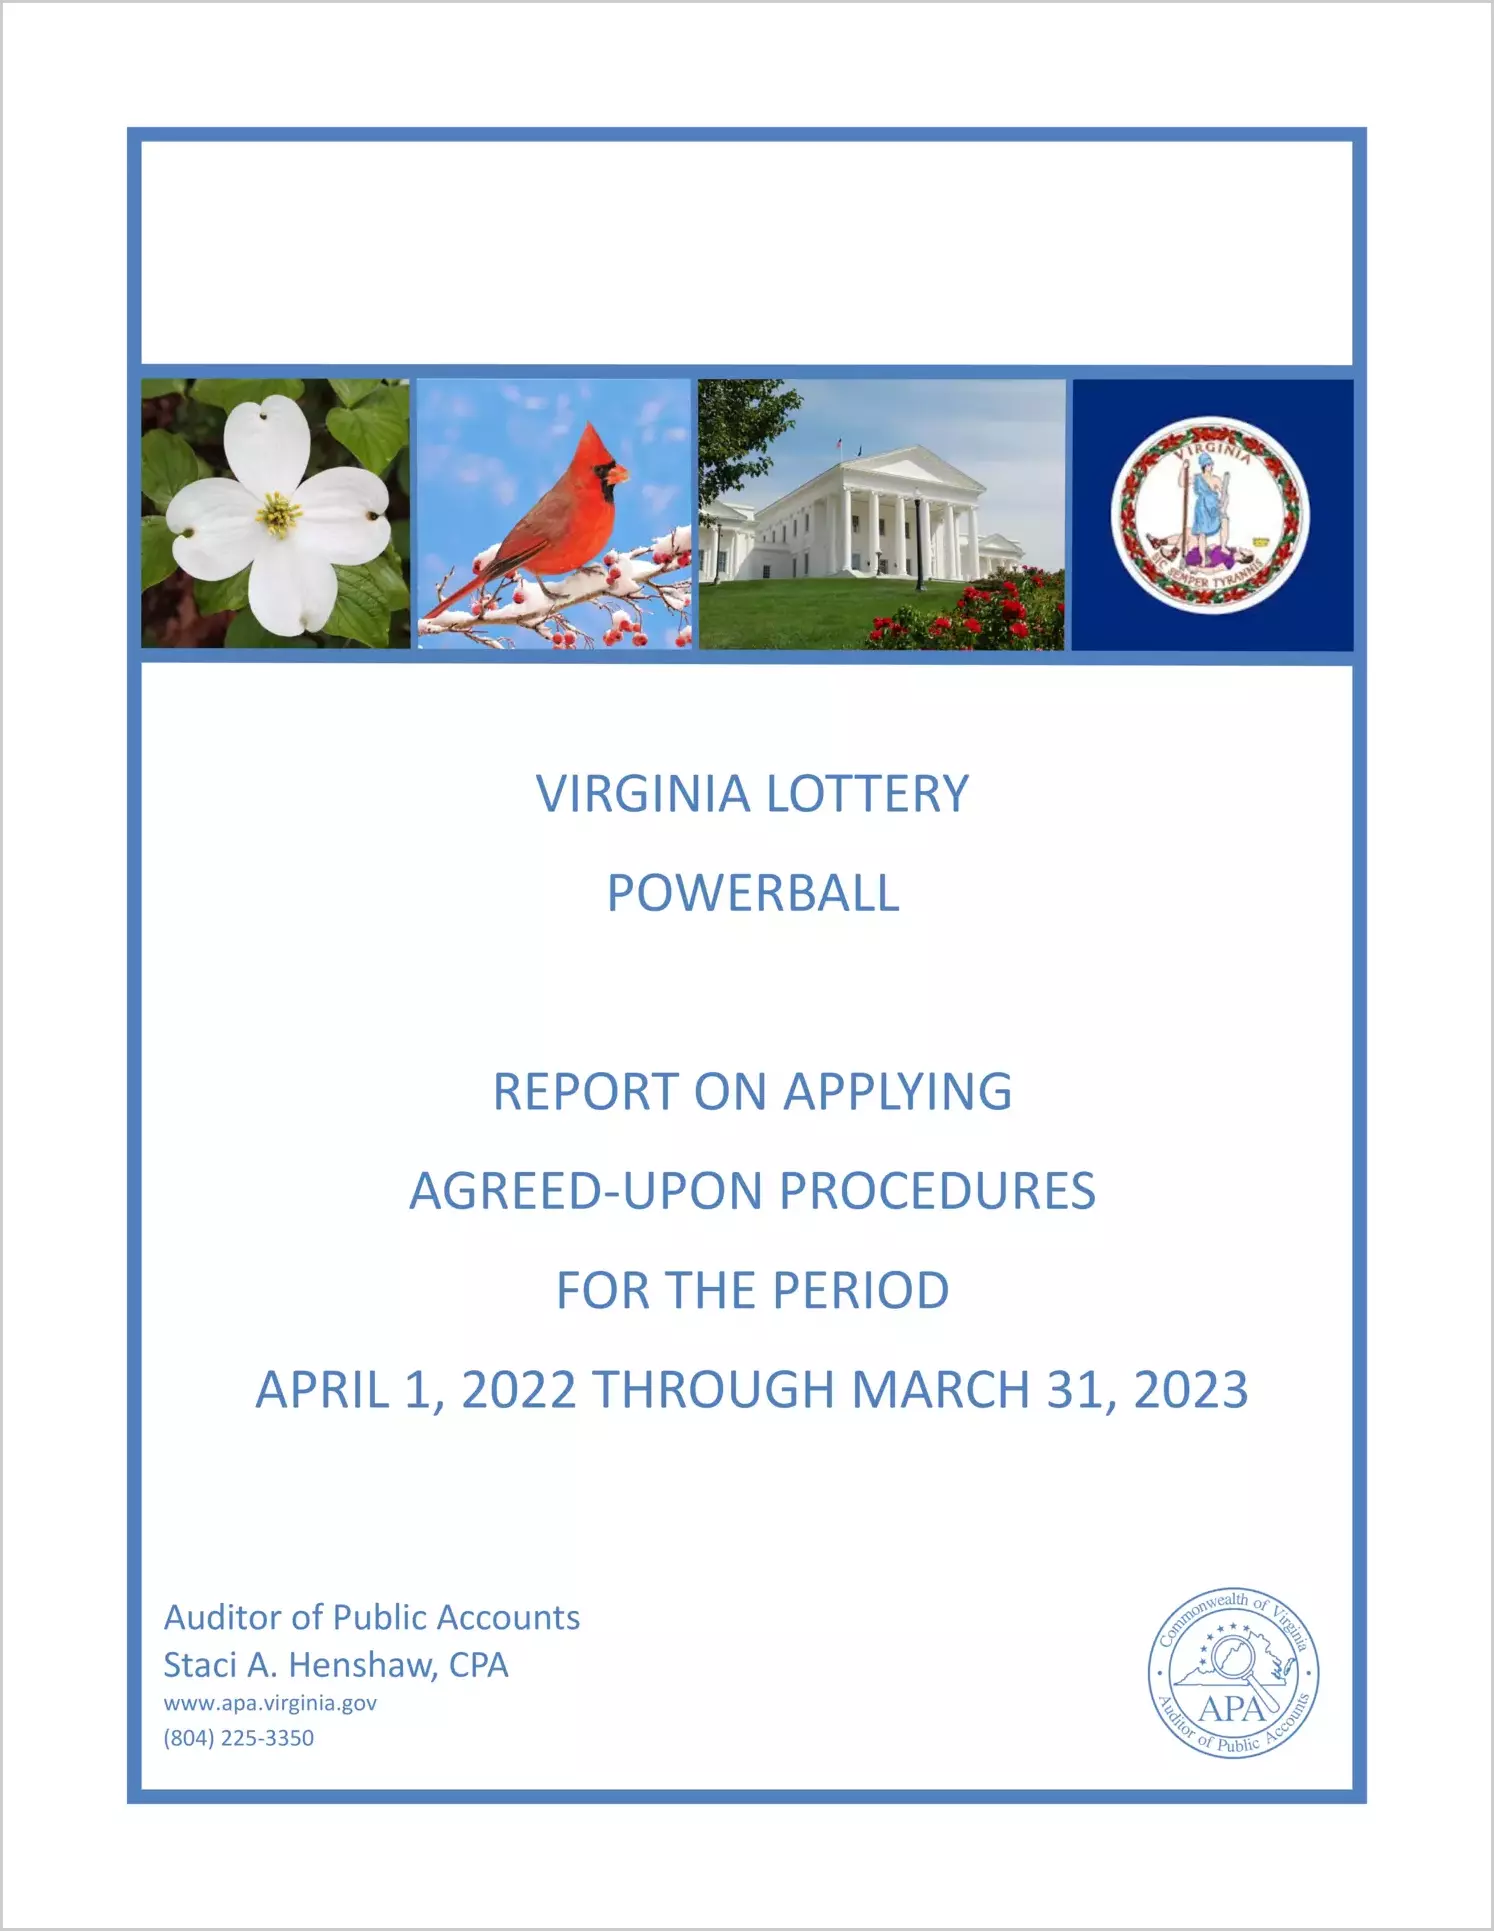 Virginia Lottery PowerBall Report on Applying Agreed-Upon Procedures for the period April 1, 2022 through March 31, 2023